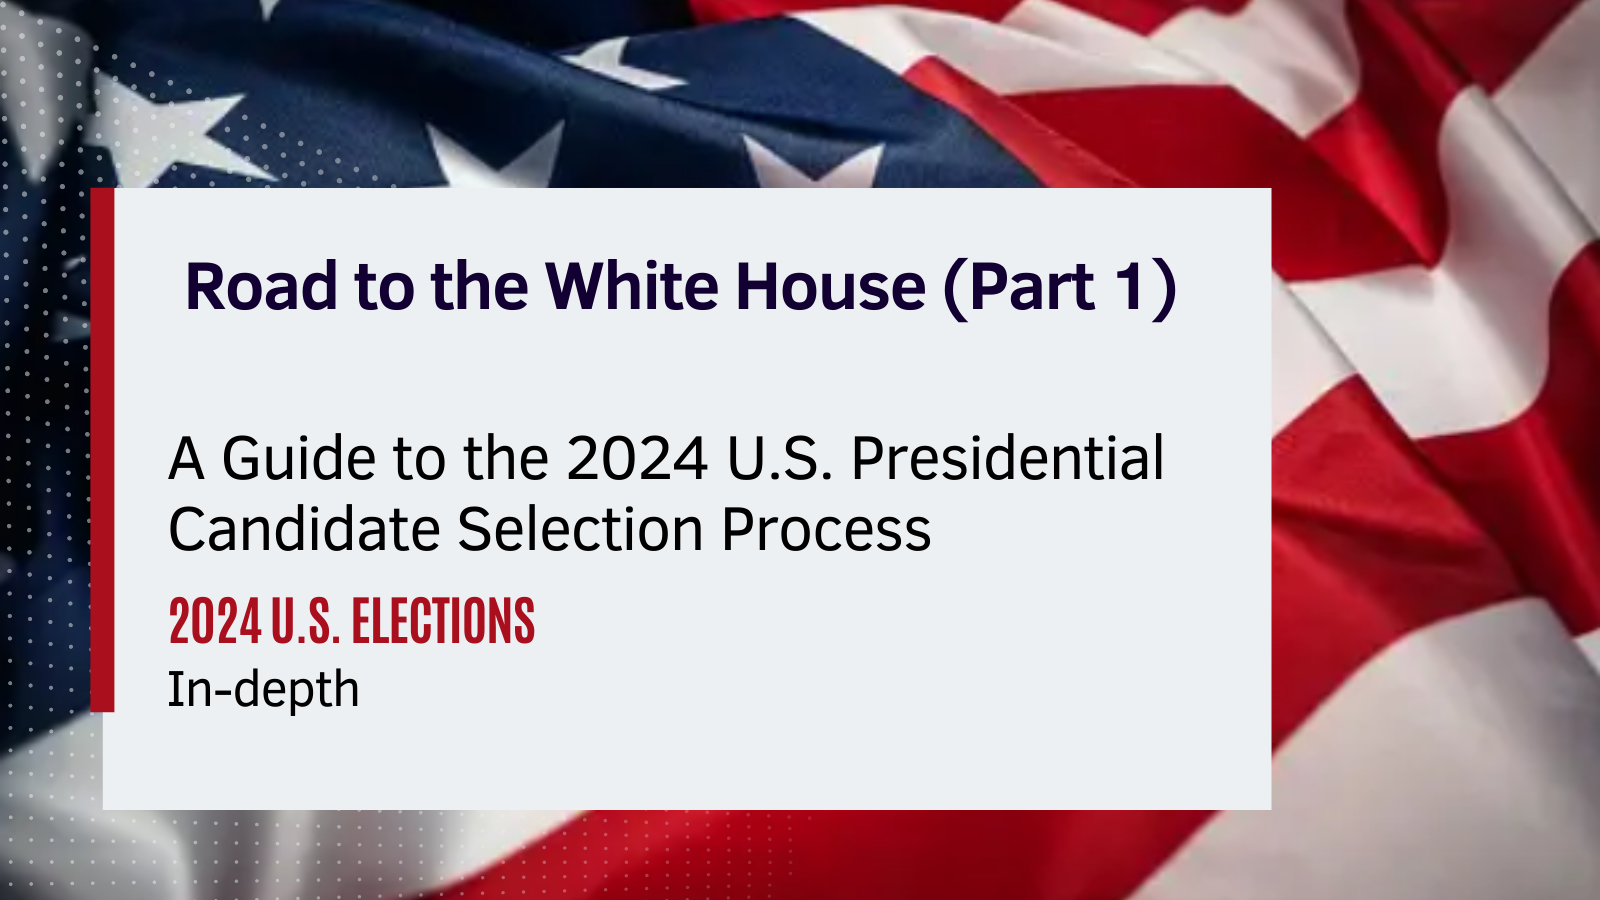 Road to the White House (Part 1): A Guide to the 2024 U.S. Presidential Candidate Selection Process